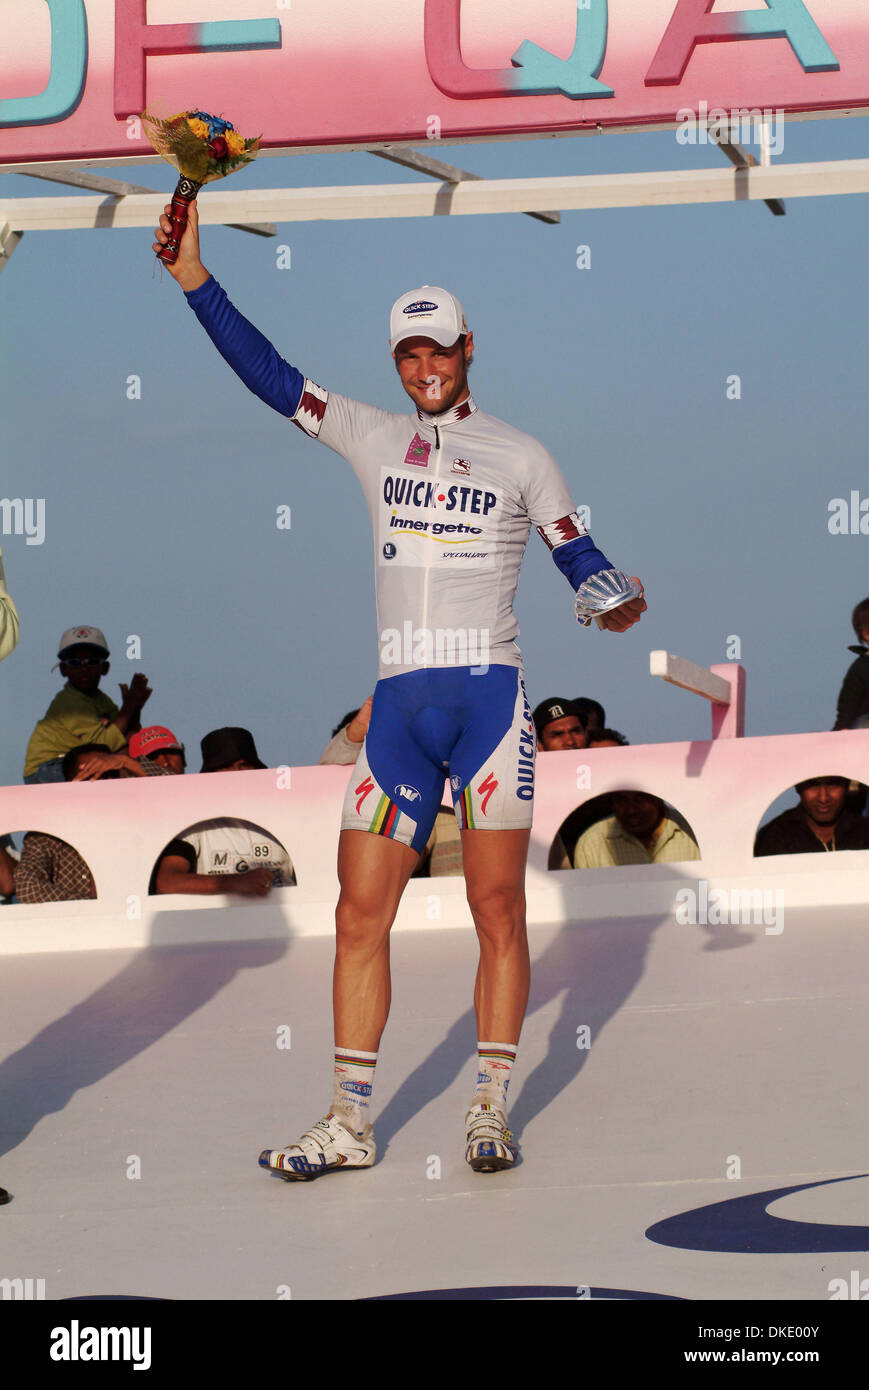 Feb 02, 2007 - Doha, Qatar - TOM BOONEN, winner of sprints at the Tour of Qatar 2007. Stage 6: Sealine Beach Resort to Doha Corniche - 134 kms. For the 4th time in 6 days, Tom Boonen, once again, proved that he was the master of sprinting by claiming the final stage of the Tour of Qatar. His Quickstep team mate, Wilfried Cretskens, wins the overall classification of the event. The  Stock Photo